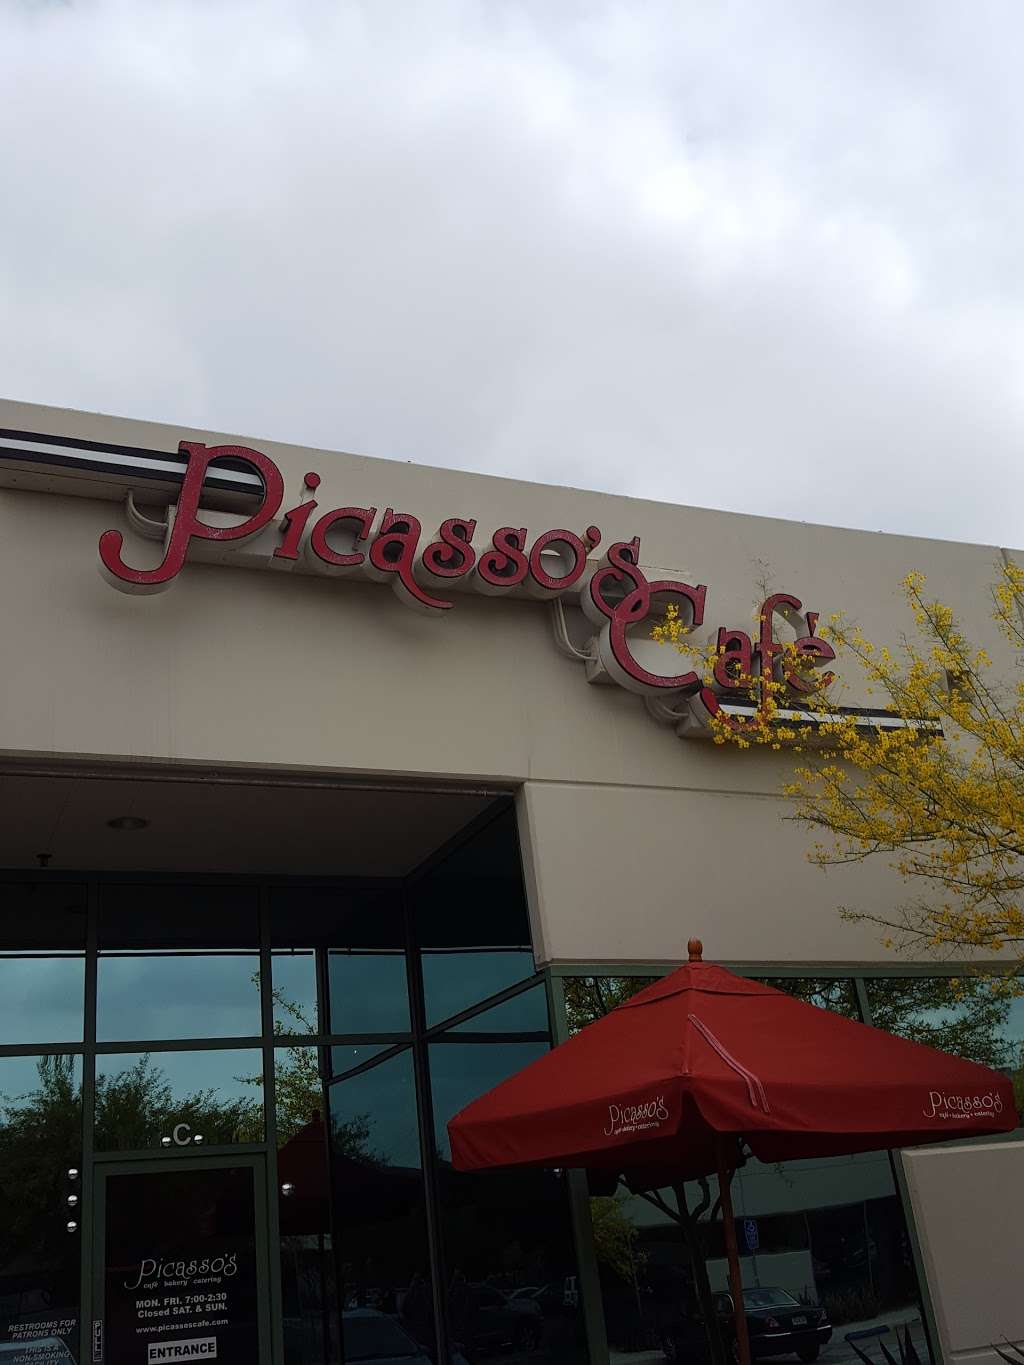 Picassos Cafe, Bakery & Catering Company | Suites A-D, 6070 Irwindale Ave, Irwindale, CA 91706 | Phone: (626) 969-6100